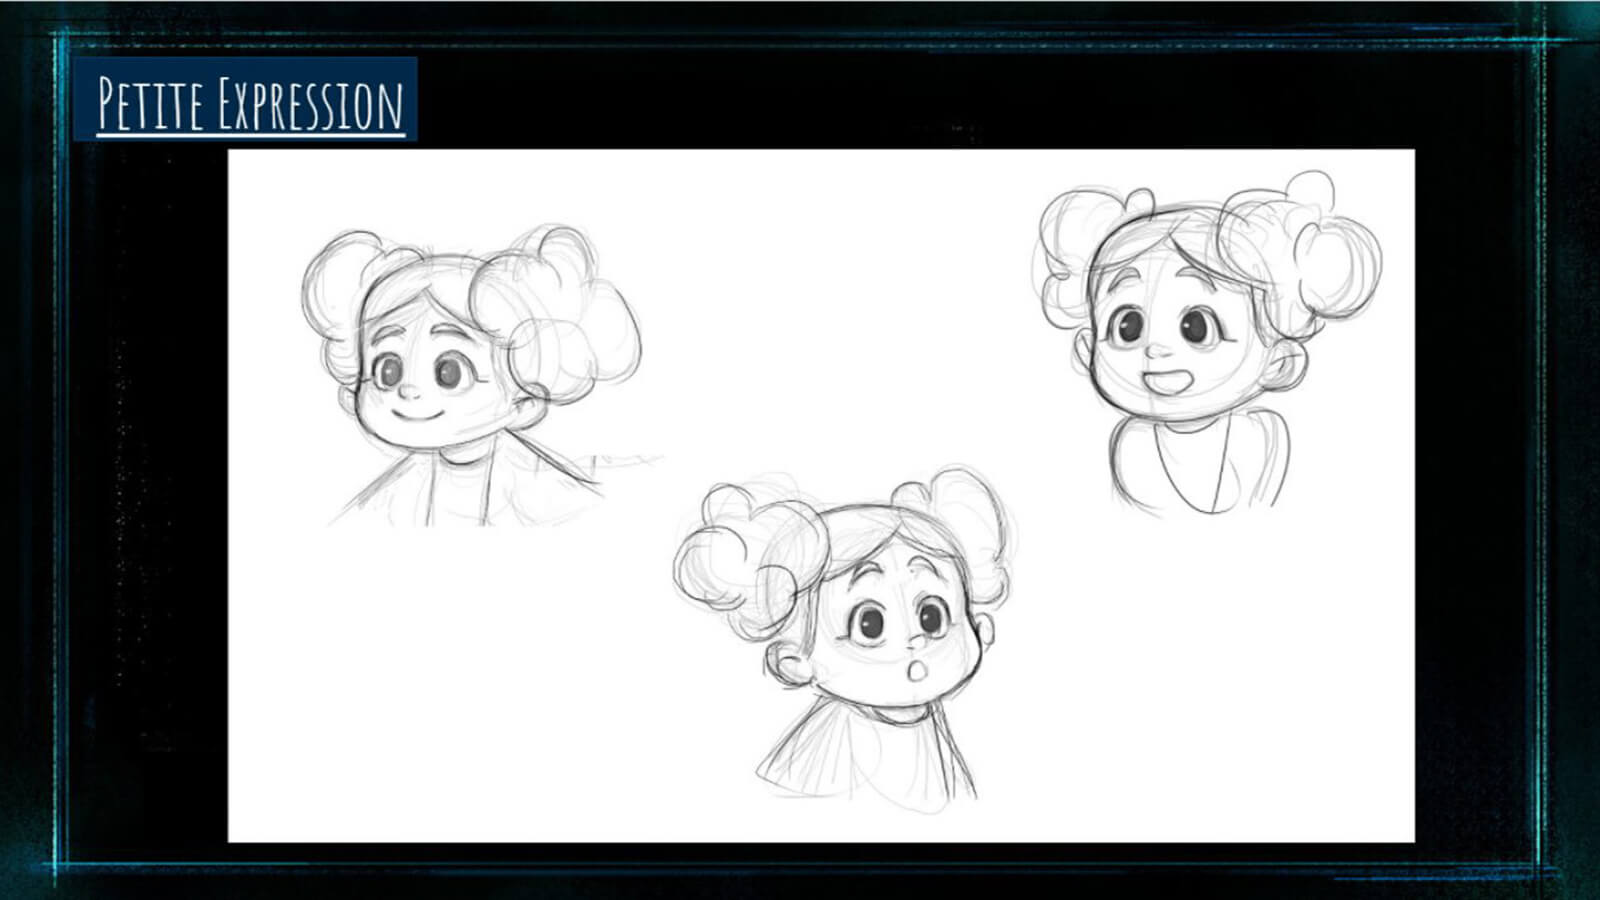 A "Character Expression" sheet showing the film's character Petite making various facial expressions.